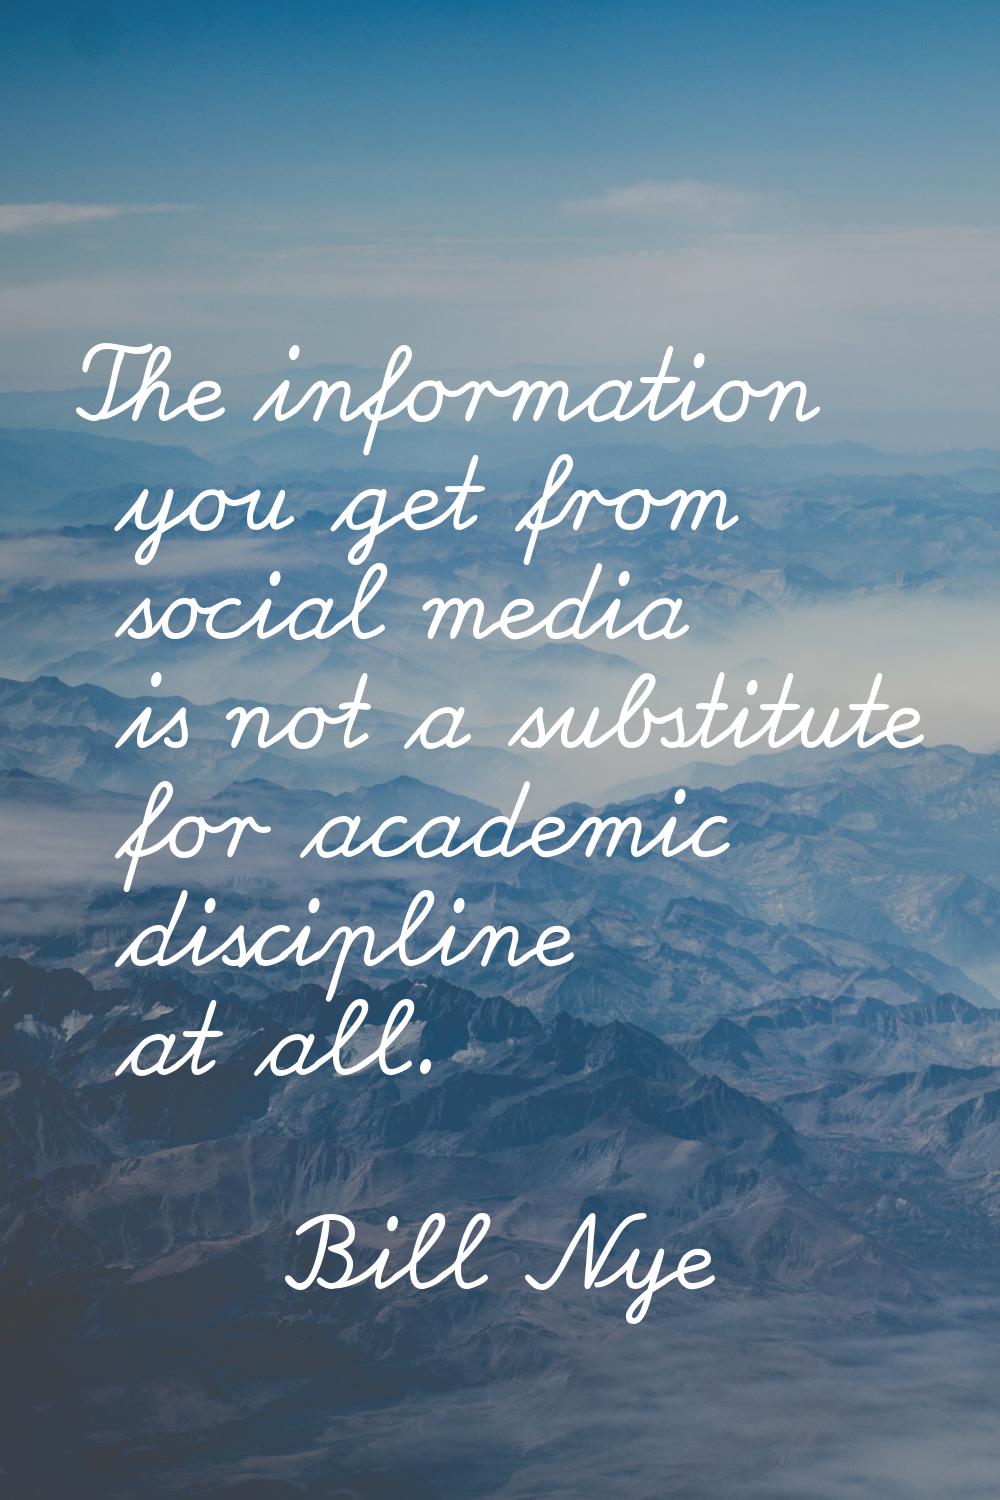 The information you get from social media is not a substitute for academic discipline at all.